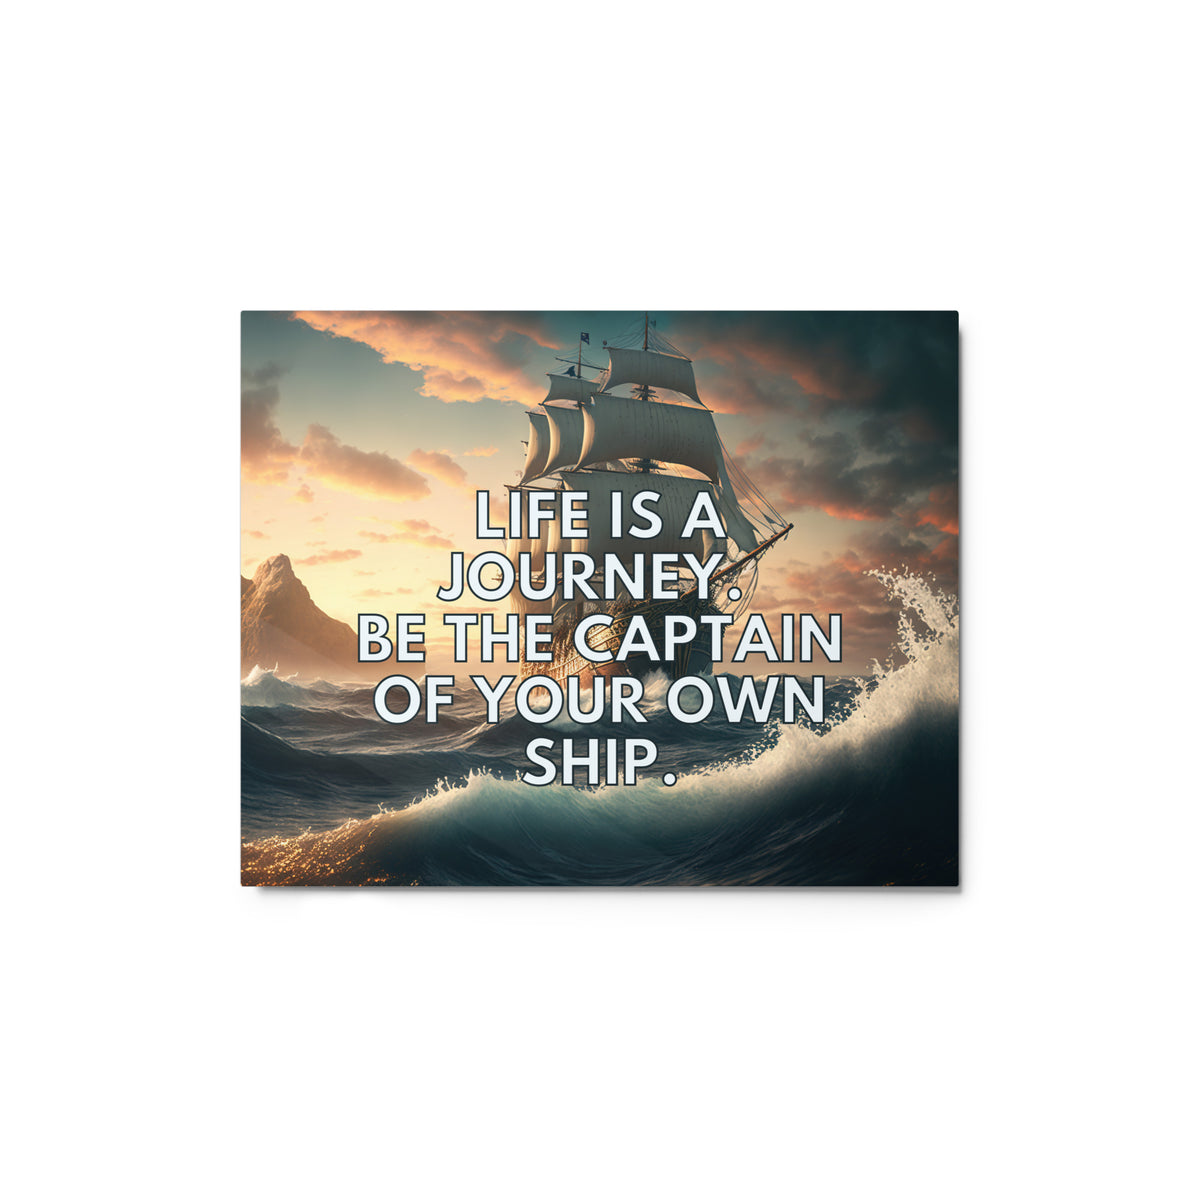 Life Is A Journey. Be The Captain Of Your Own Ship. | Glossy Metal Print  Success Acceleration Tools